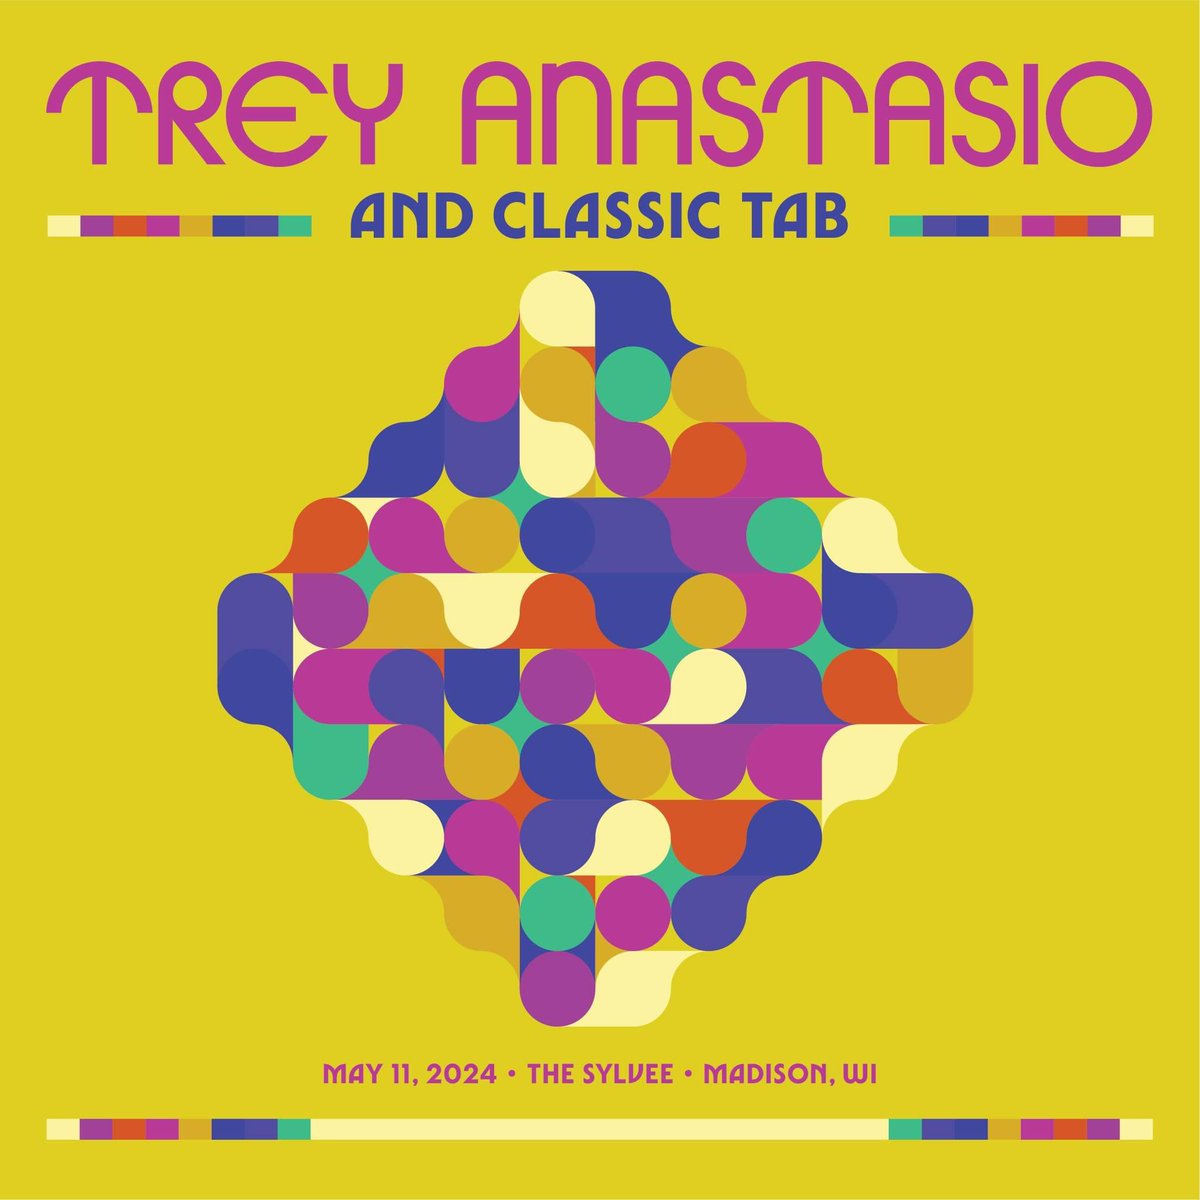 Trey and Classic TAB's show from Madison, WI on 5/11/24 is available now for download and streaming via the LivePhish App: livephi.sh/trey240511